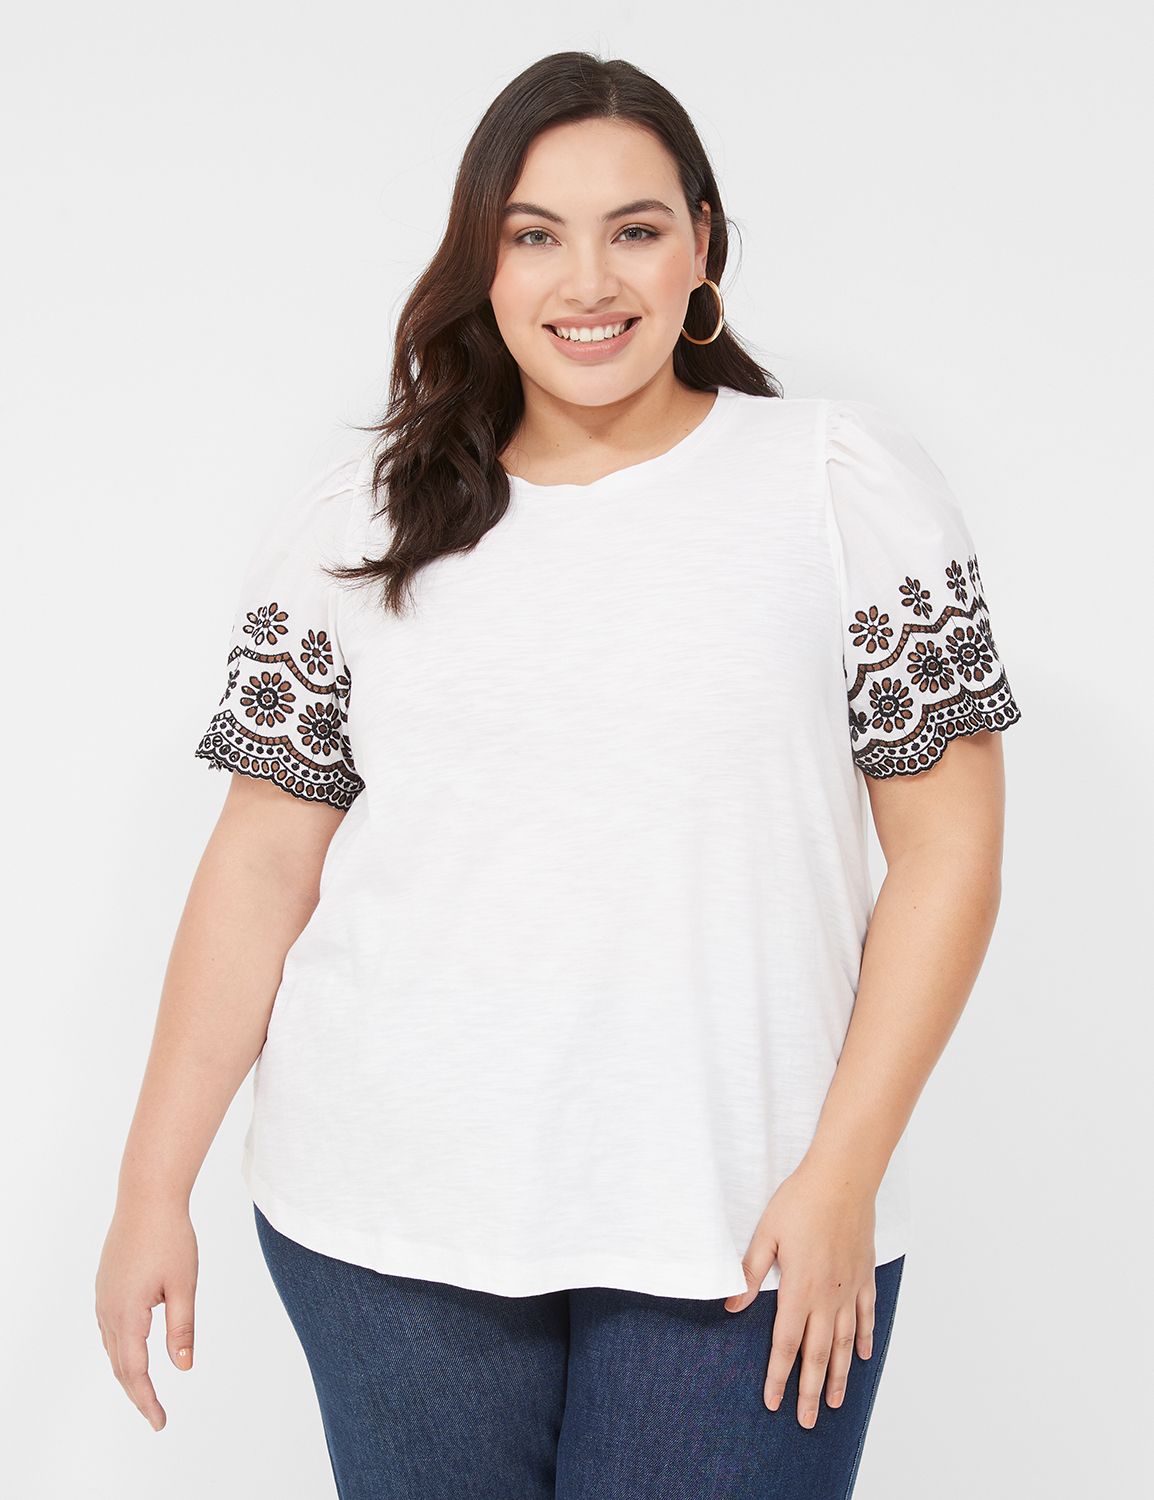 Spring Tshirts for Women 2023 Womens Plus Size Long Tunics or Tops